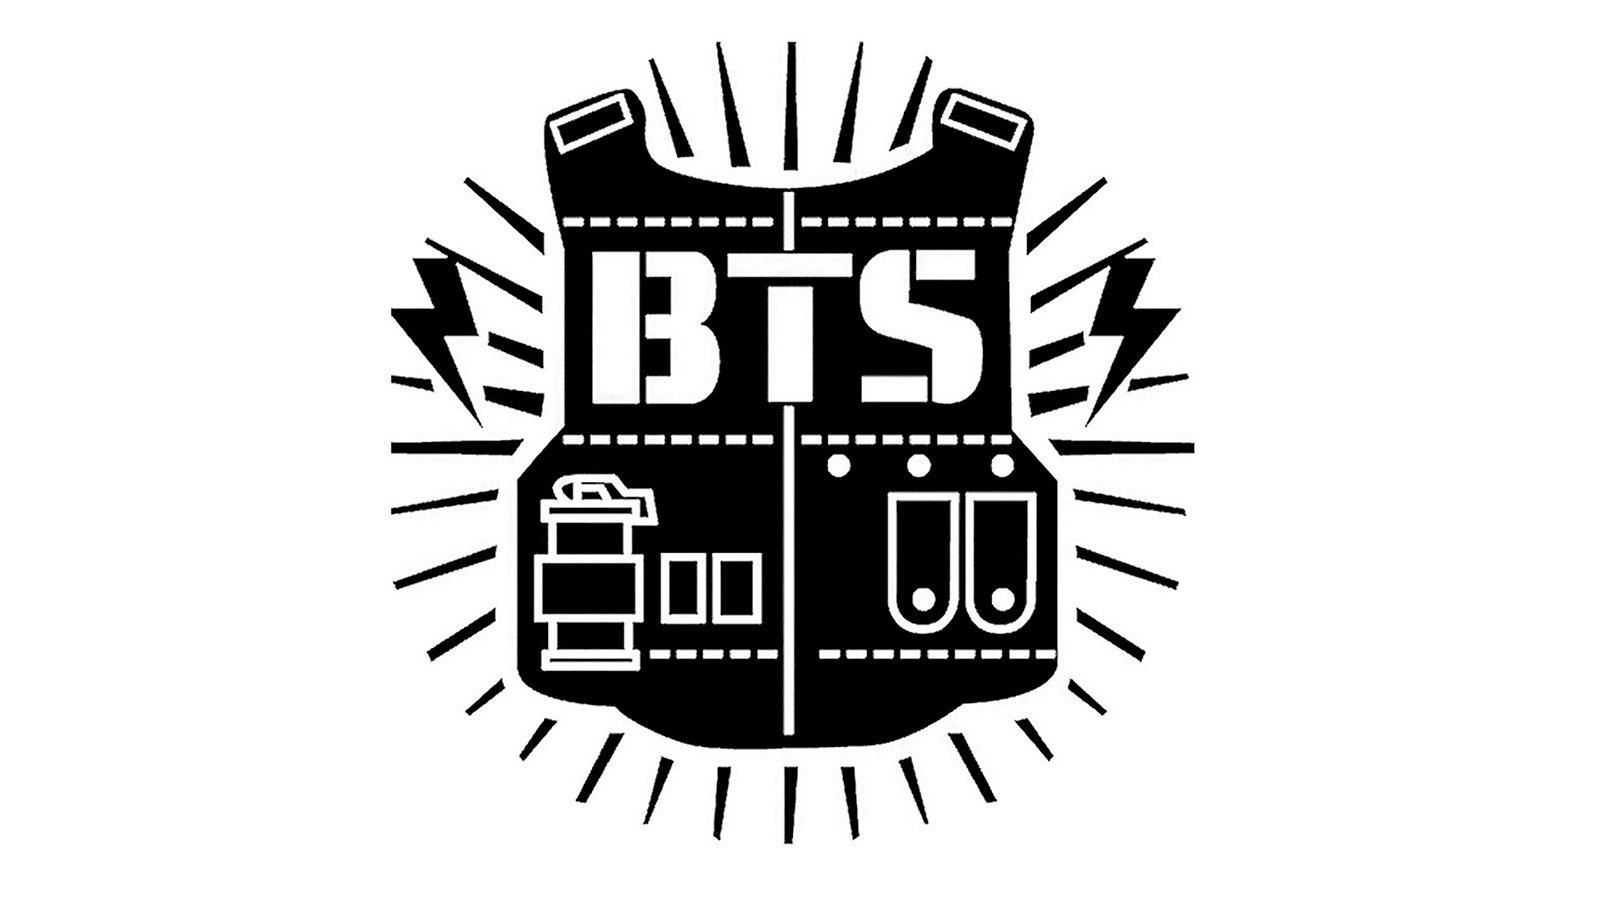 We couldn't imagine a world without the iconic BTS logo we have today. But what did it take to get this unique logo?